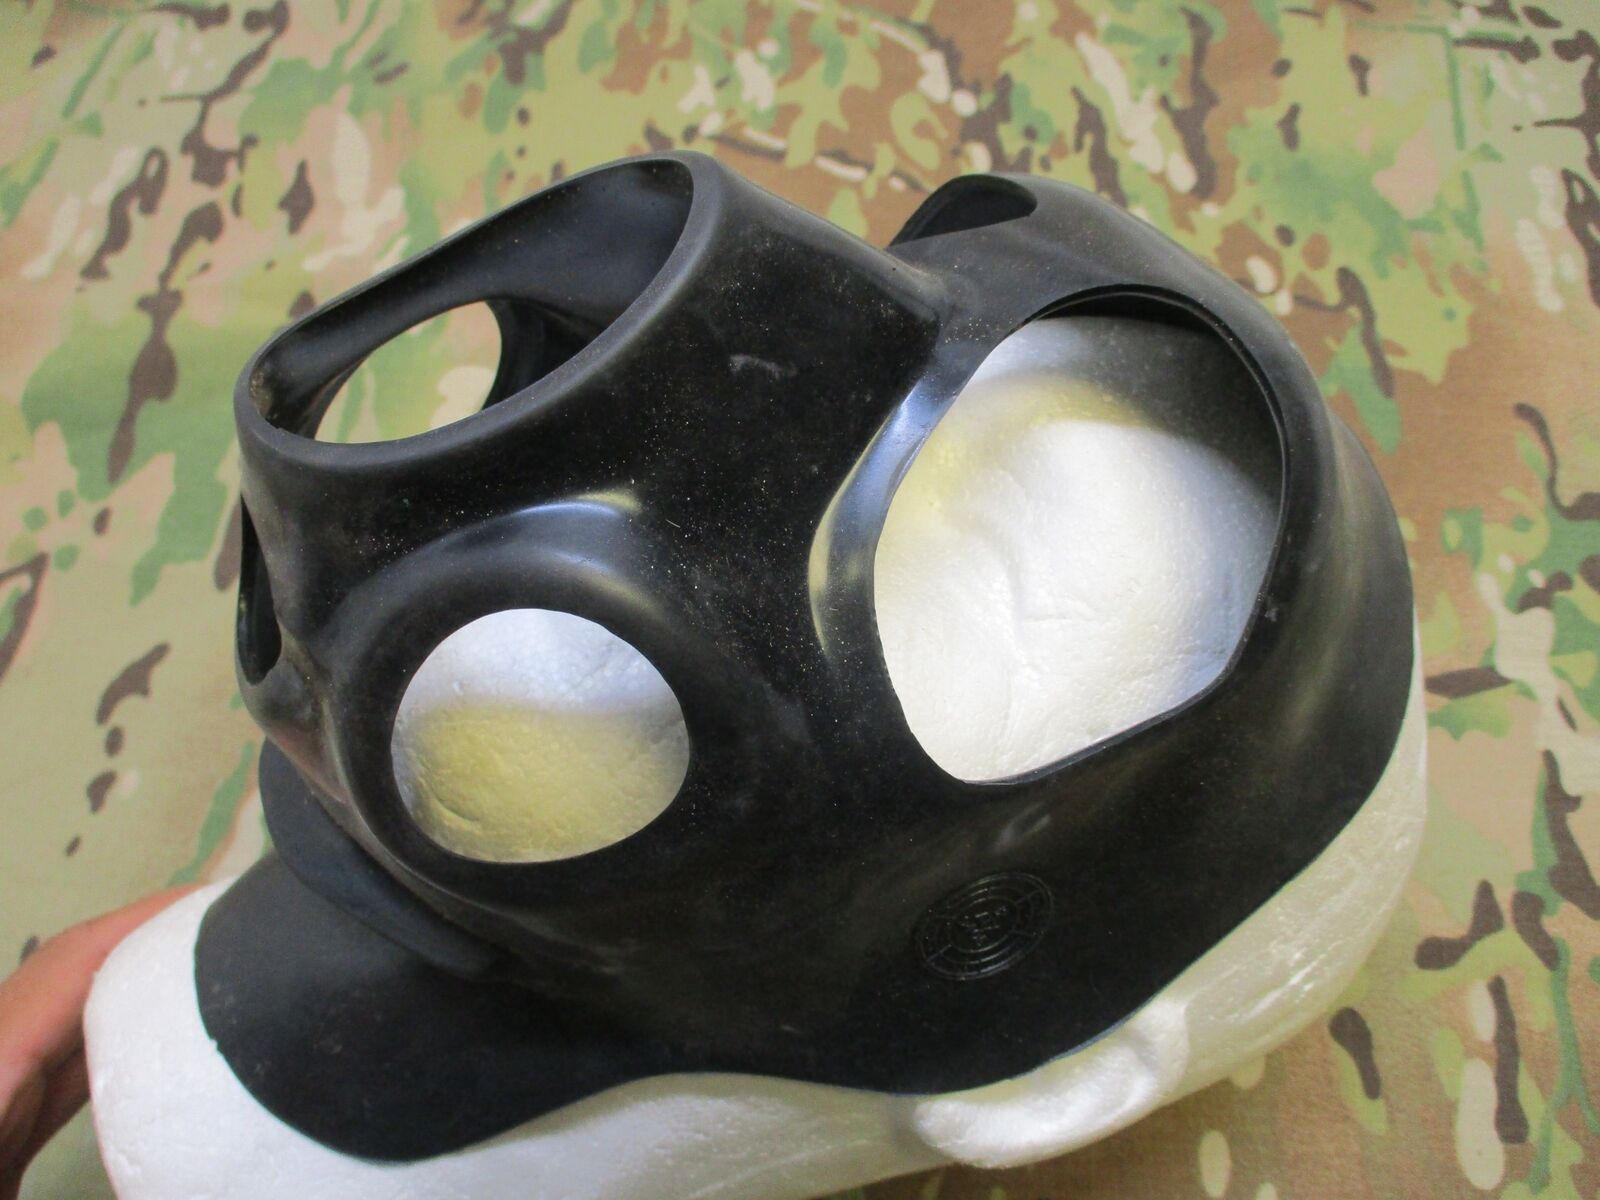 NOS M40 GAS MASK SECOND SKIN REPLACEMENT PARTS BLACK OUTER LAYER FULL FACE SMALL